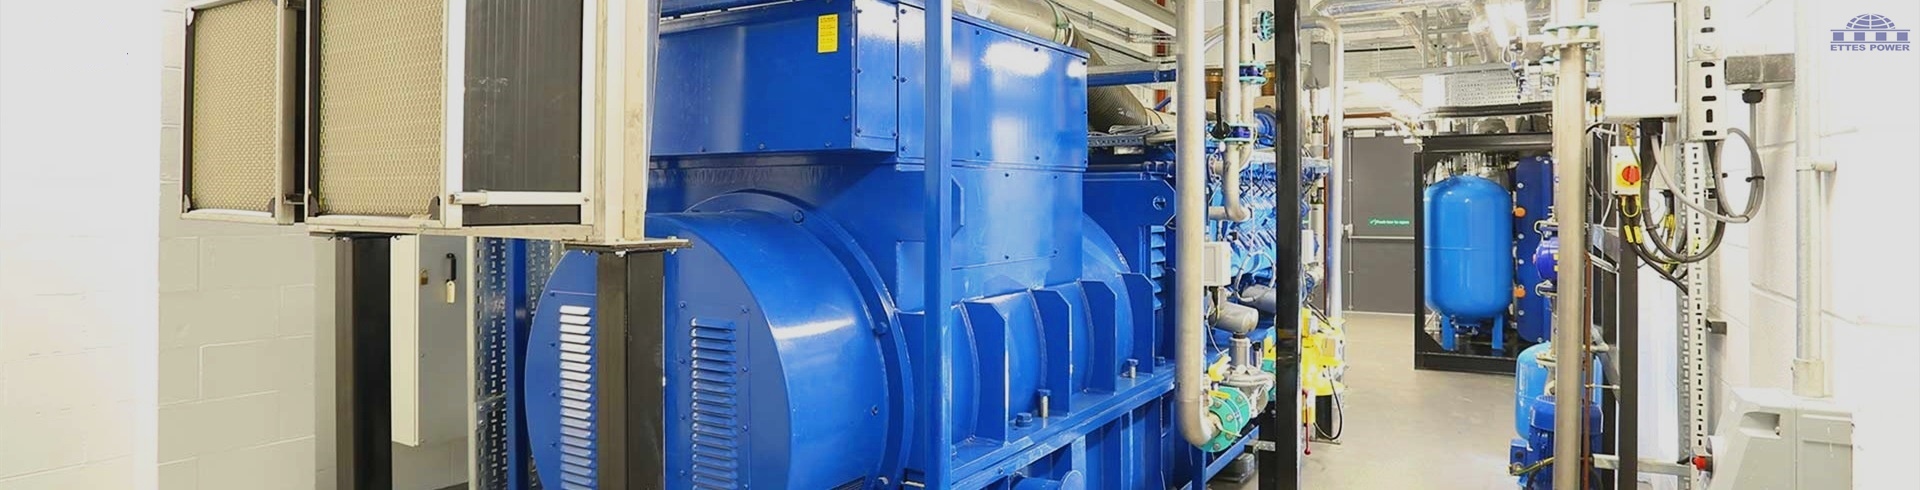 6-MWM 1000kW 1MW biogas engine generator combined heat and power CHP ETTES POWER